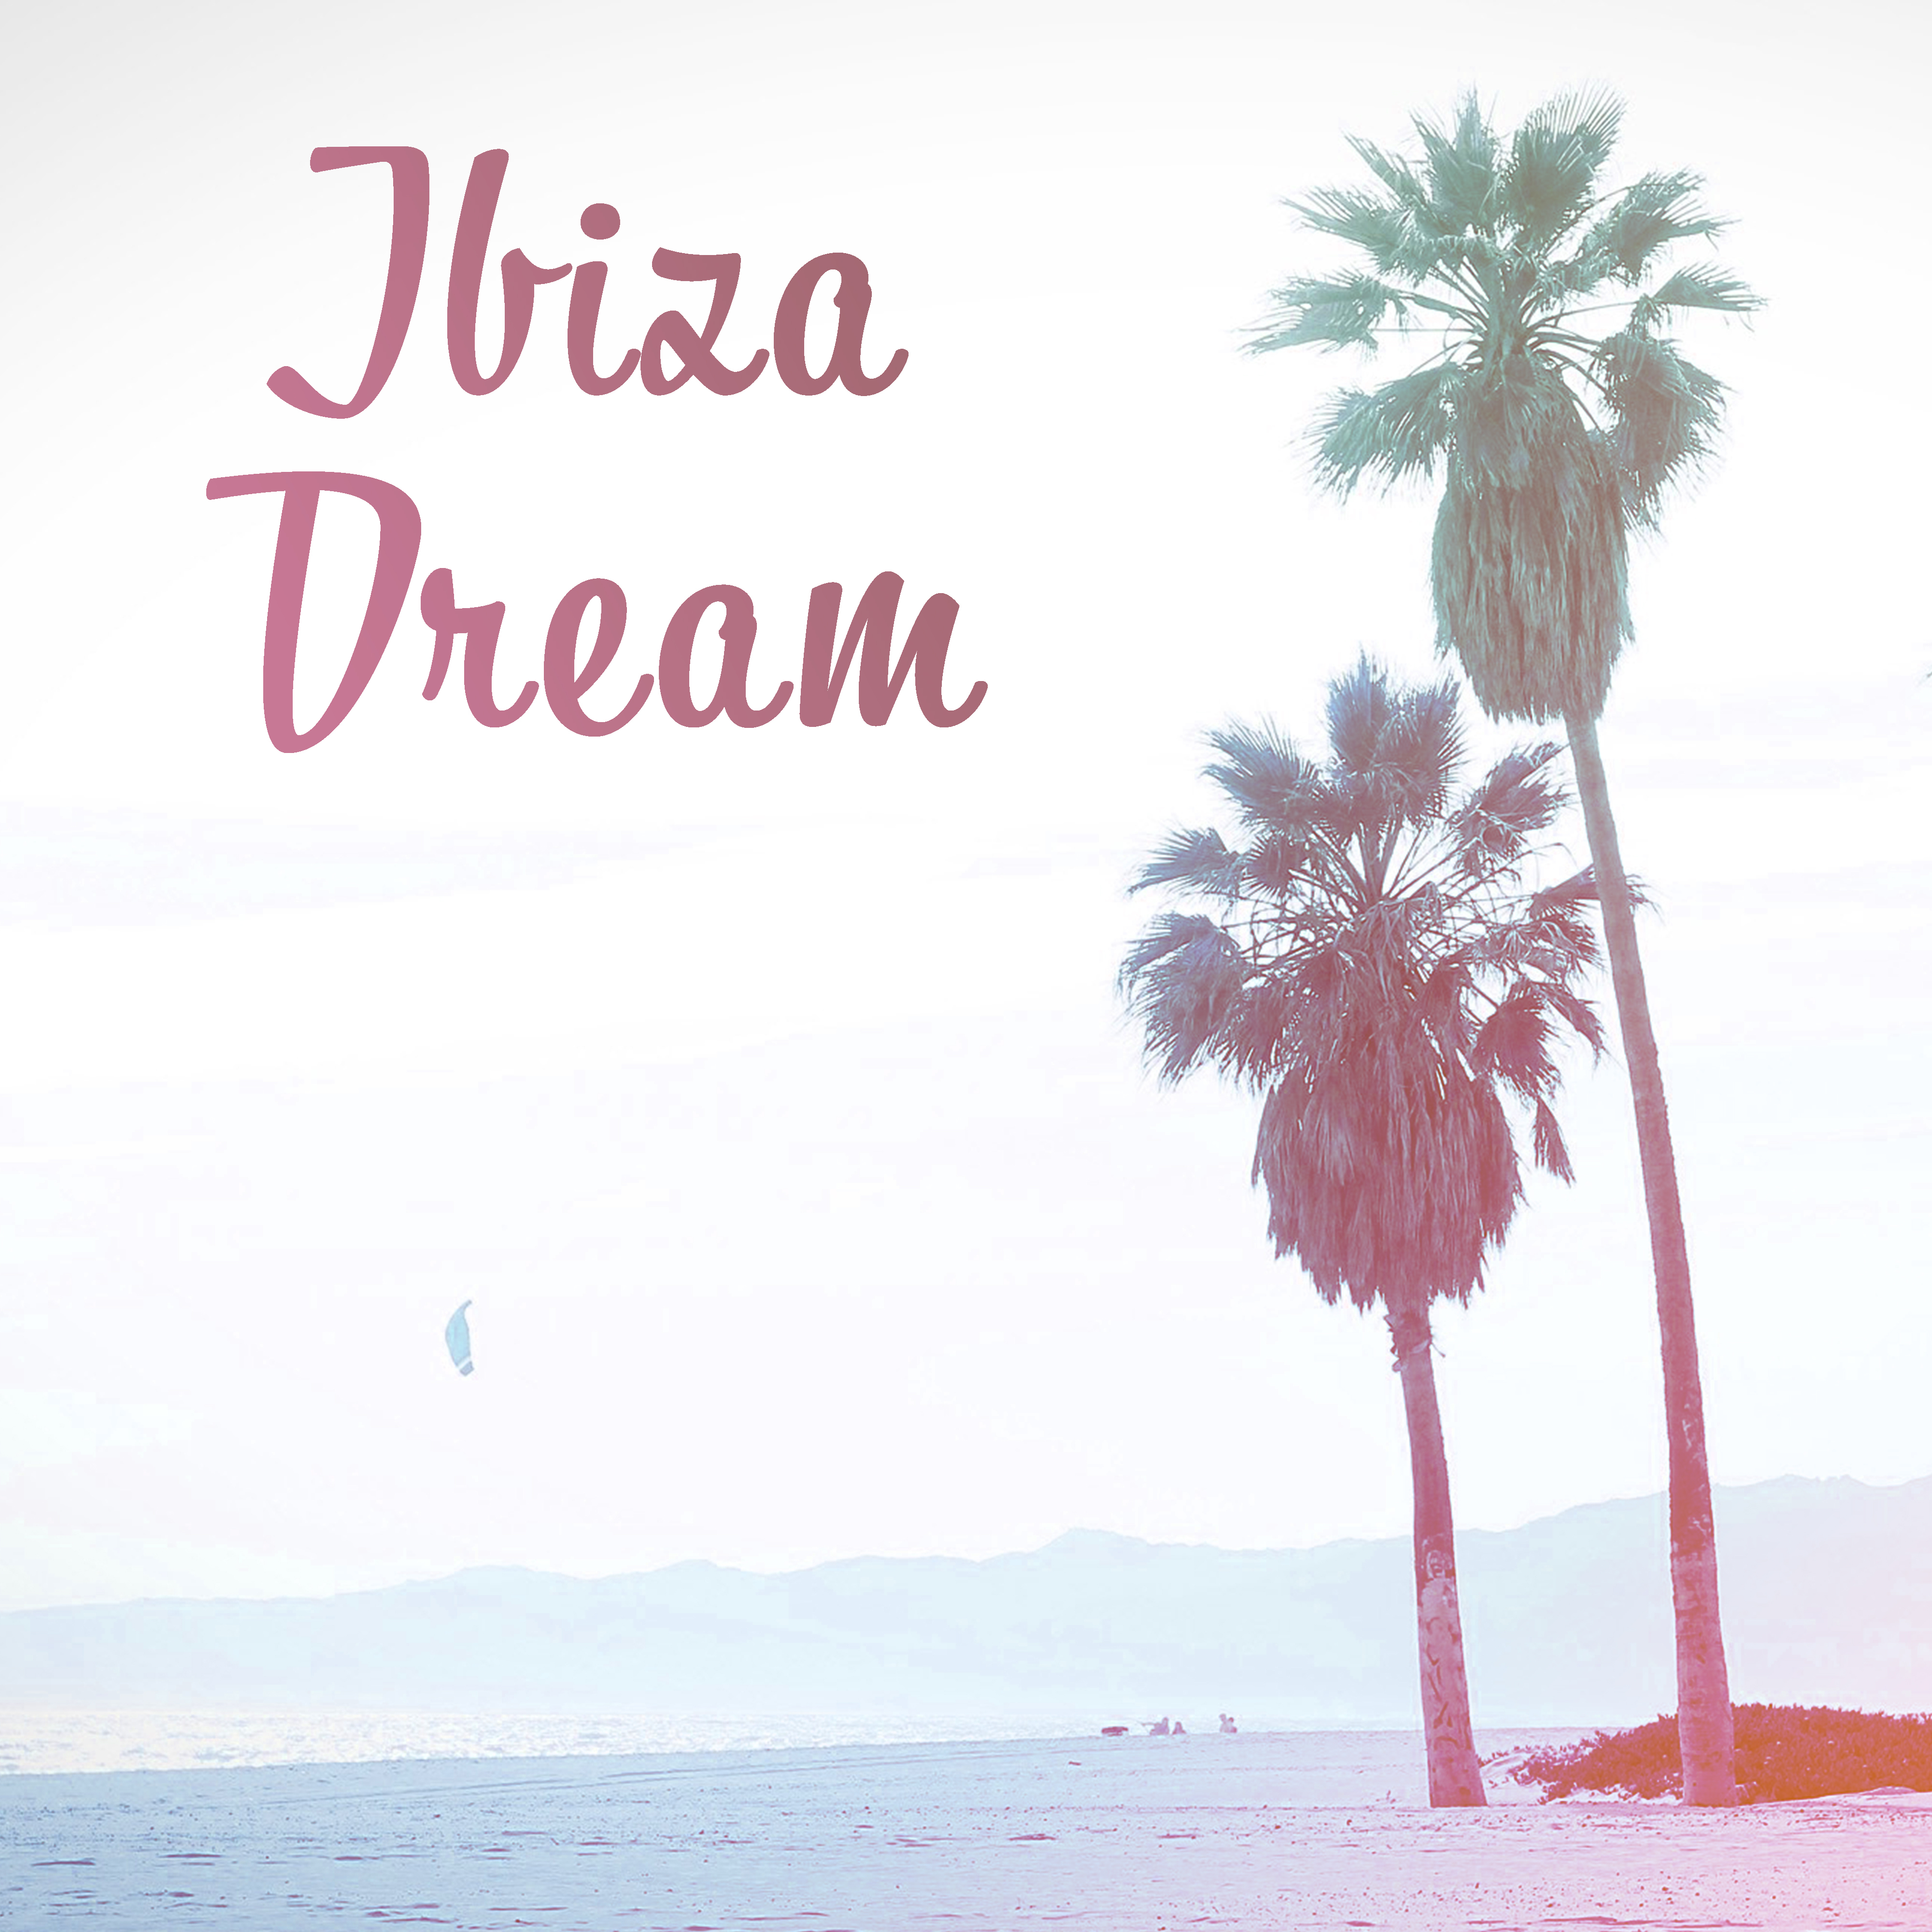 Ibiza Dream – Beach Chill, Relax, Lounge Summer, Chill House, Sex Music, Electronic Vibes, Pure Rest